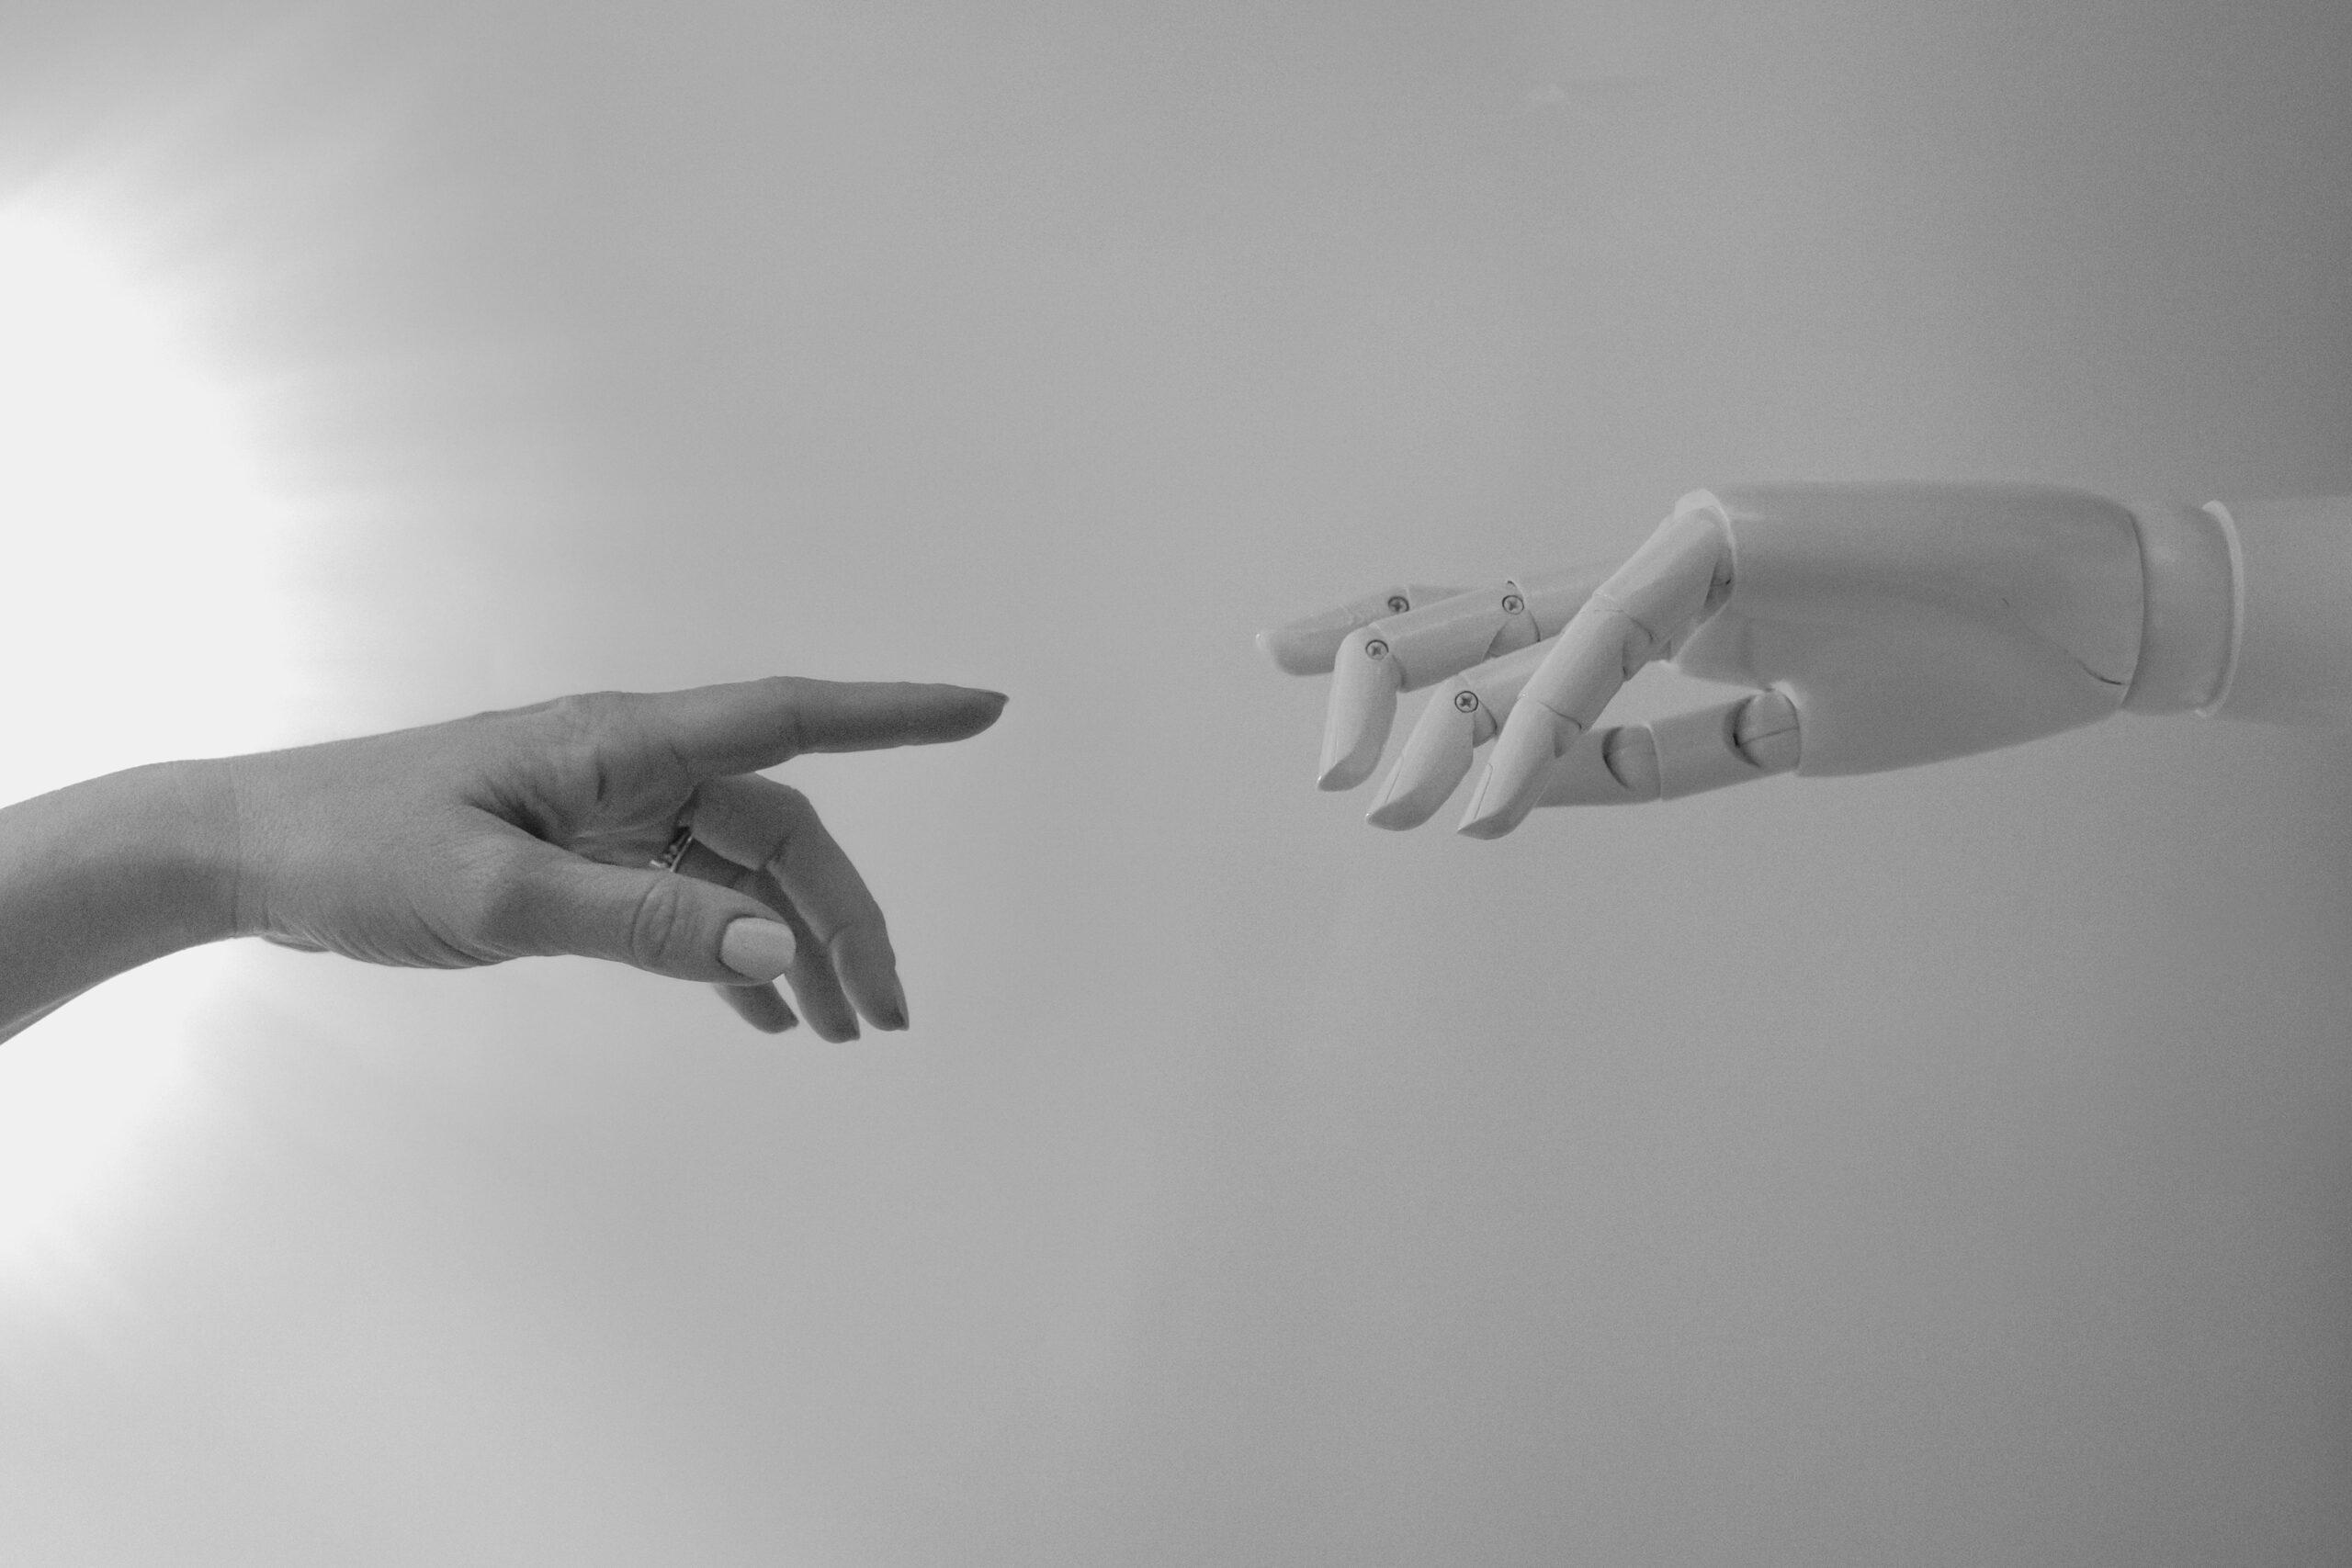 Photo by Tara Winstead: https://www.pexels.com/photo/black-and-white-photo-of-human-hand-and-robot-hand-8386422/